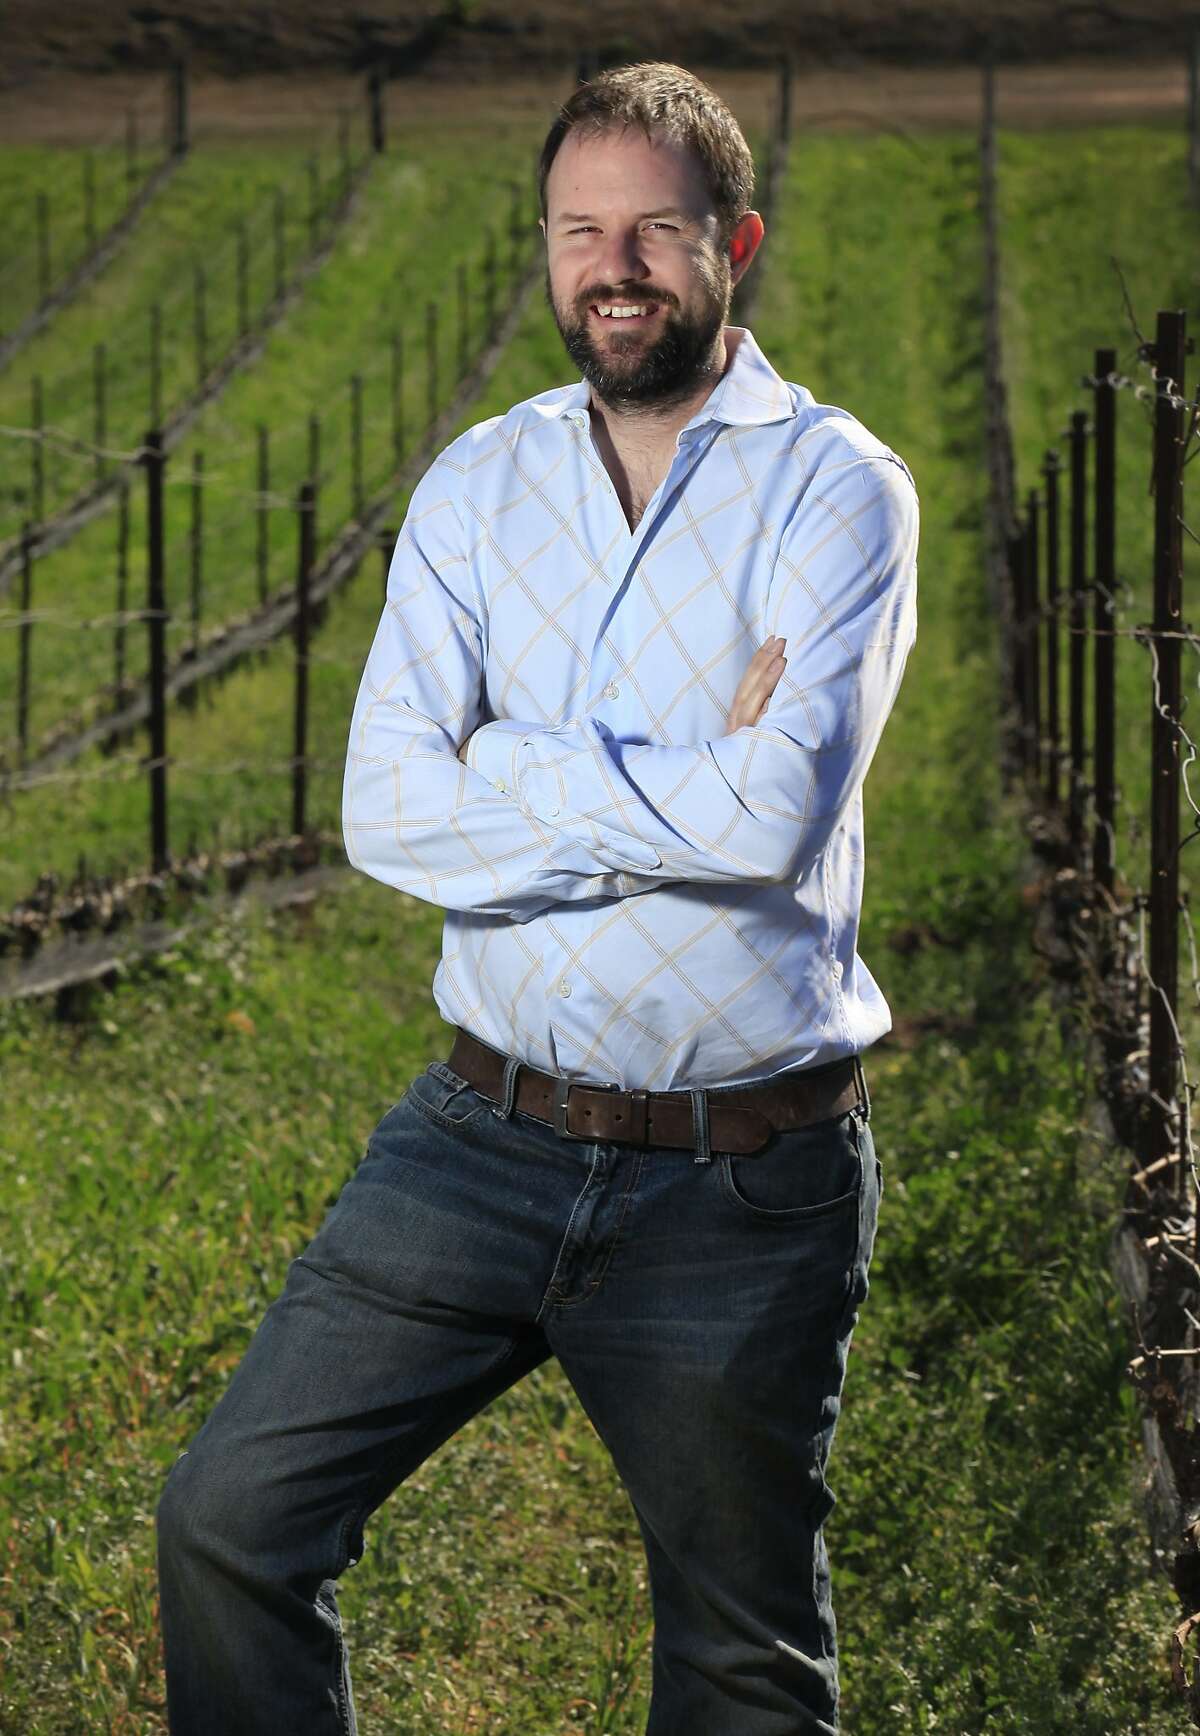 Graham Tatomer, 35, pictured among some of his dormant vines Jan. 22, 2014 at the vineyard Duvarita in Lompoc, Calif. Tatomer started his own label in 2008 but has been in the industry since he was 16 years old.